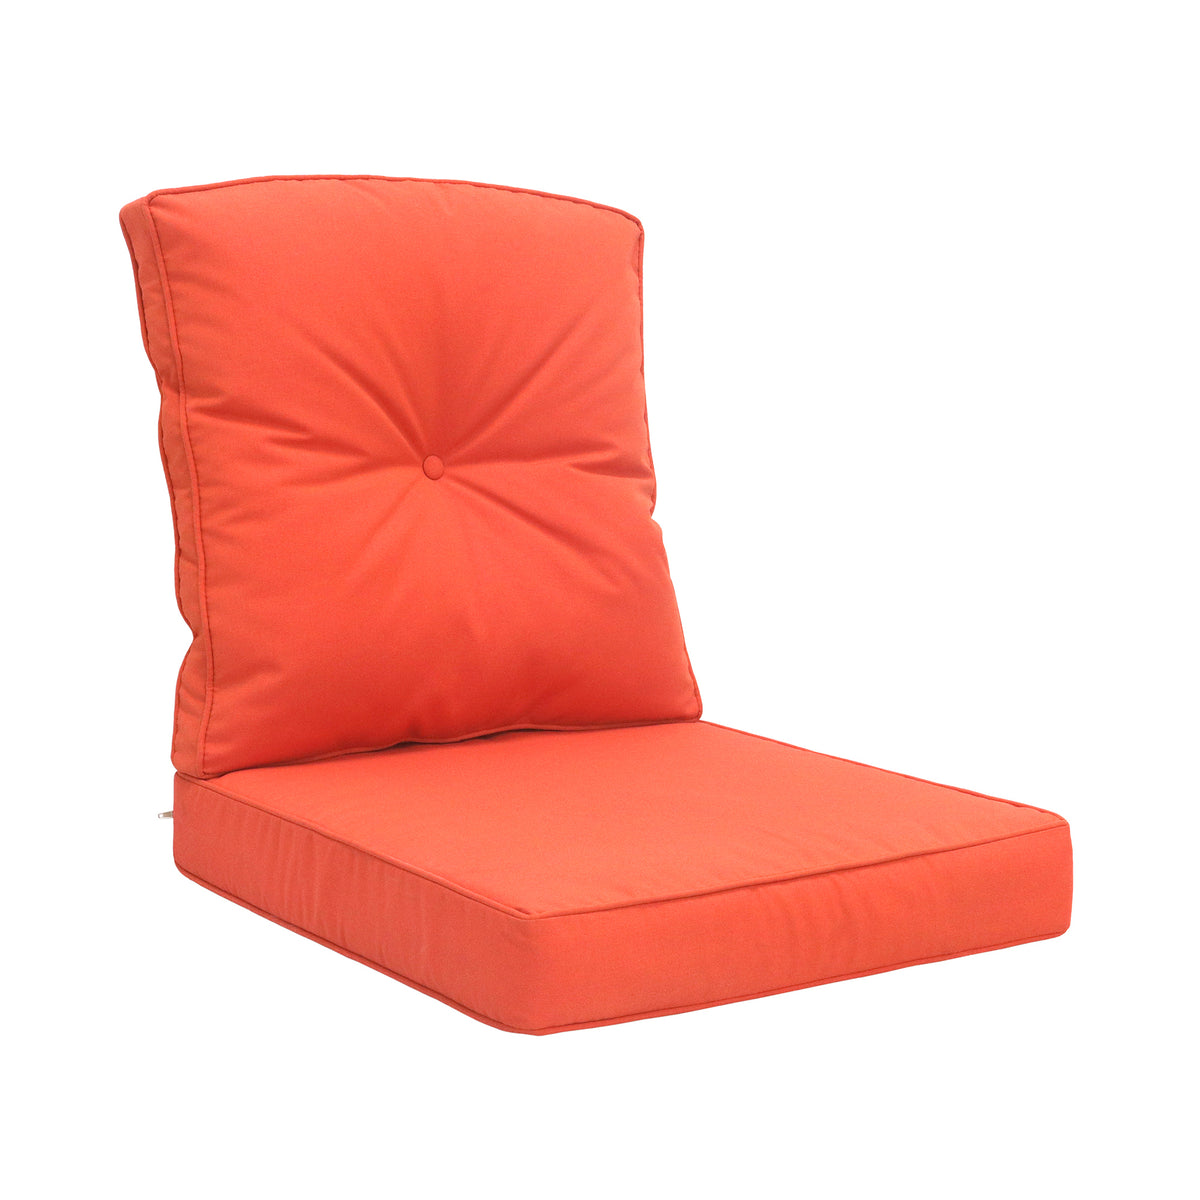 Replacement Outdoor Seat Cushions - Orange